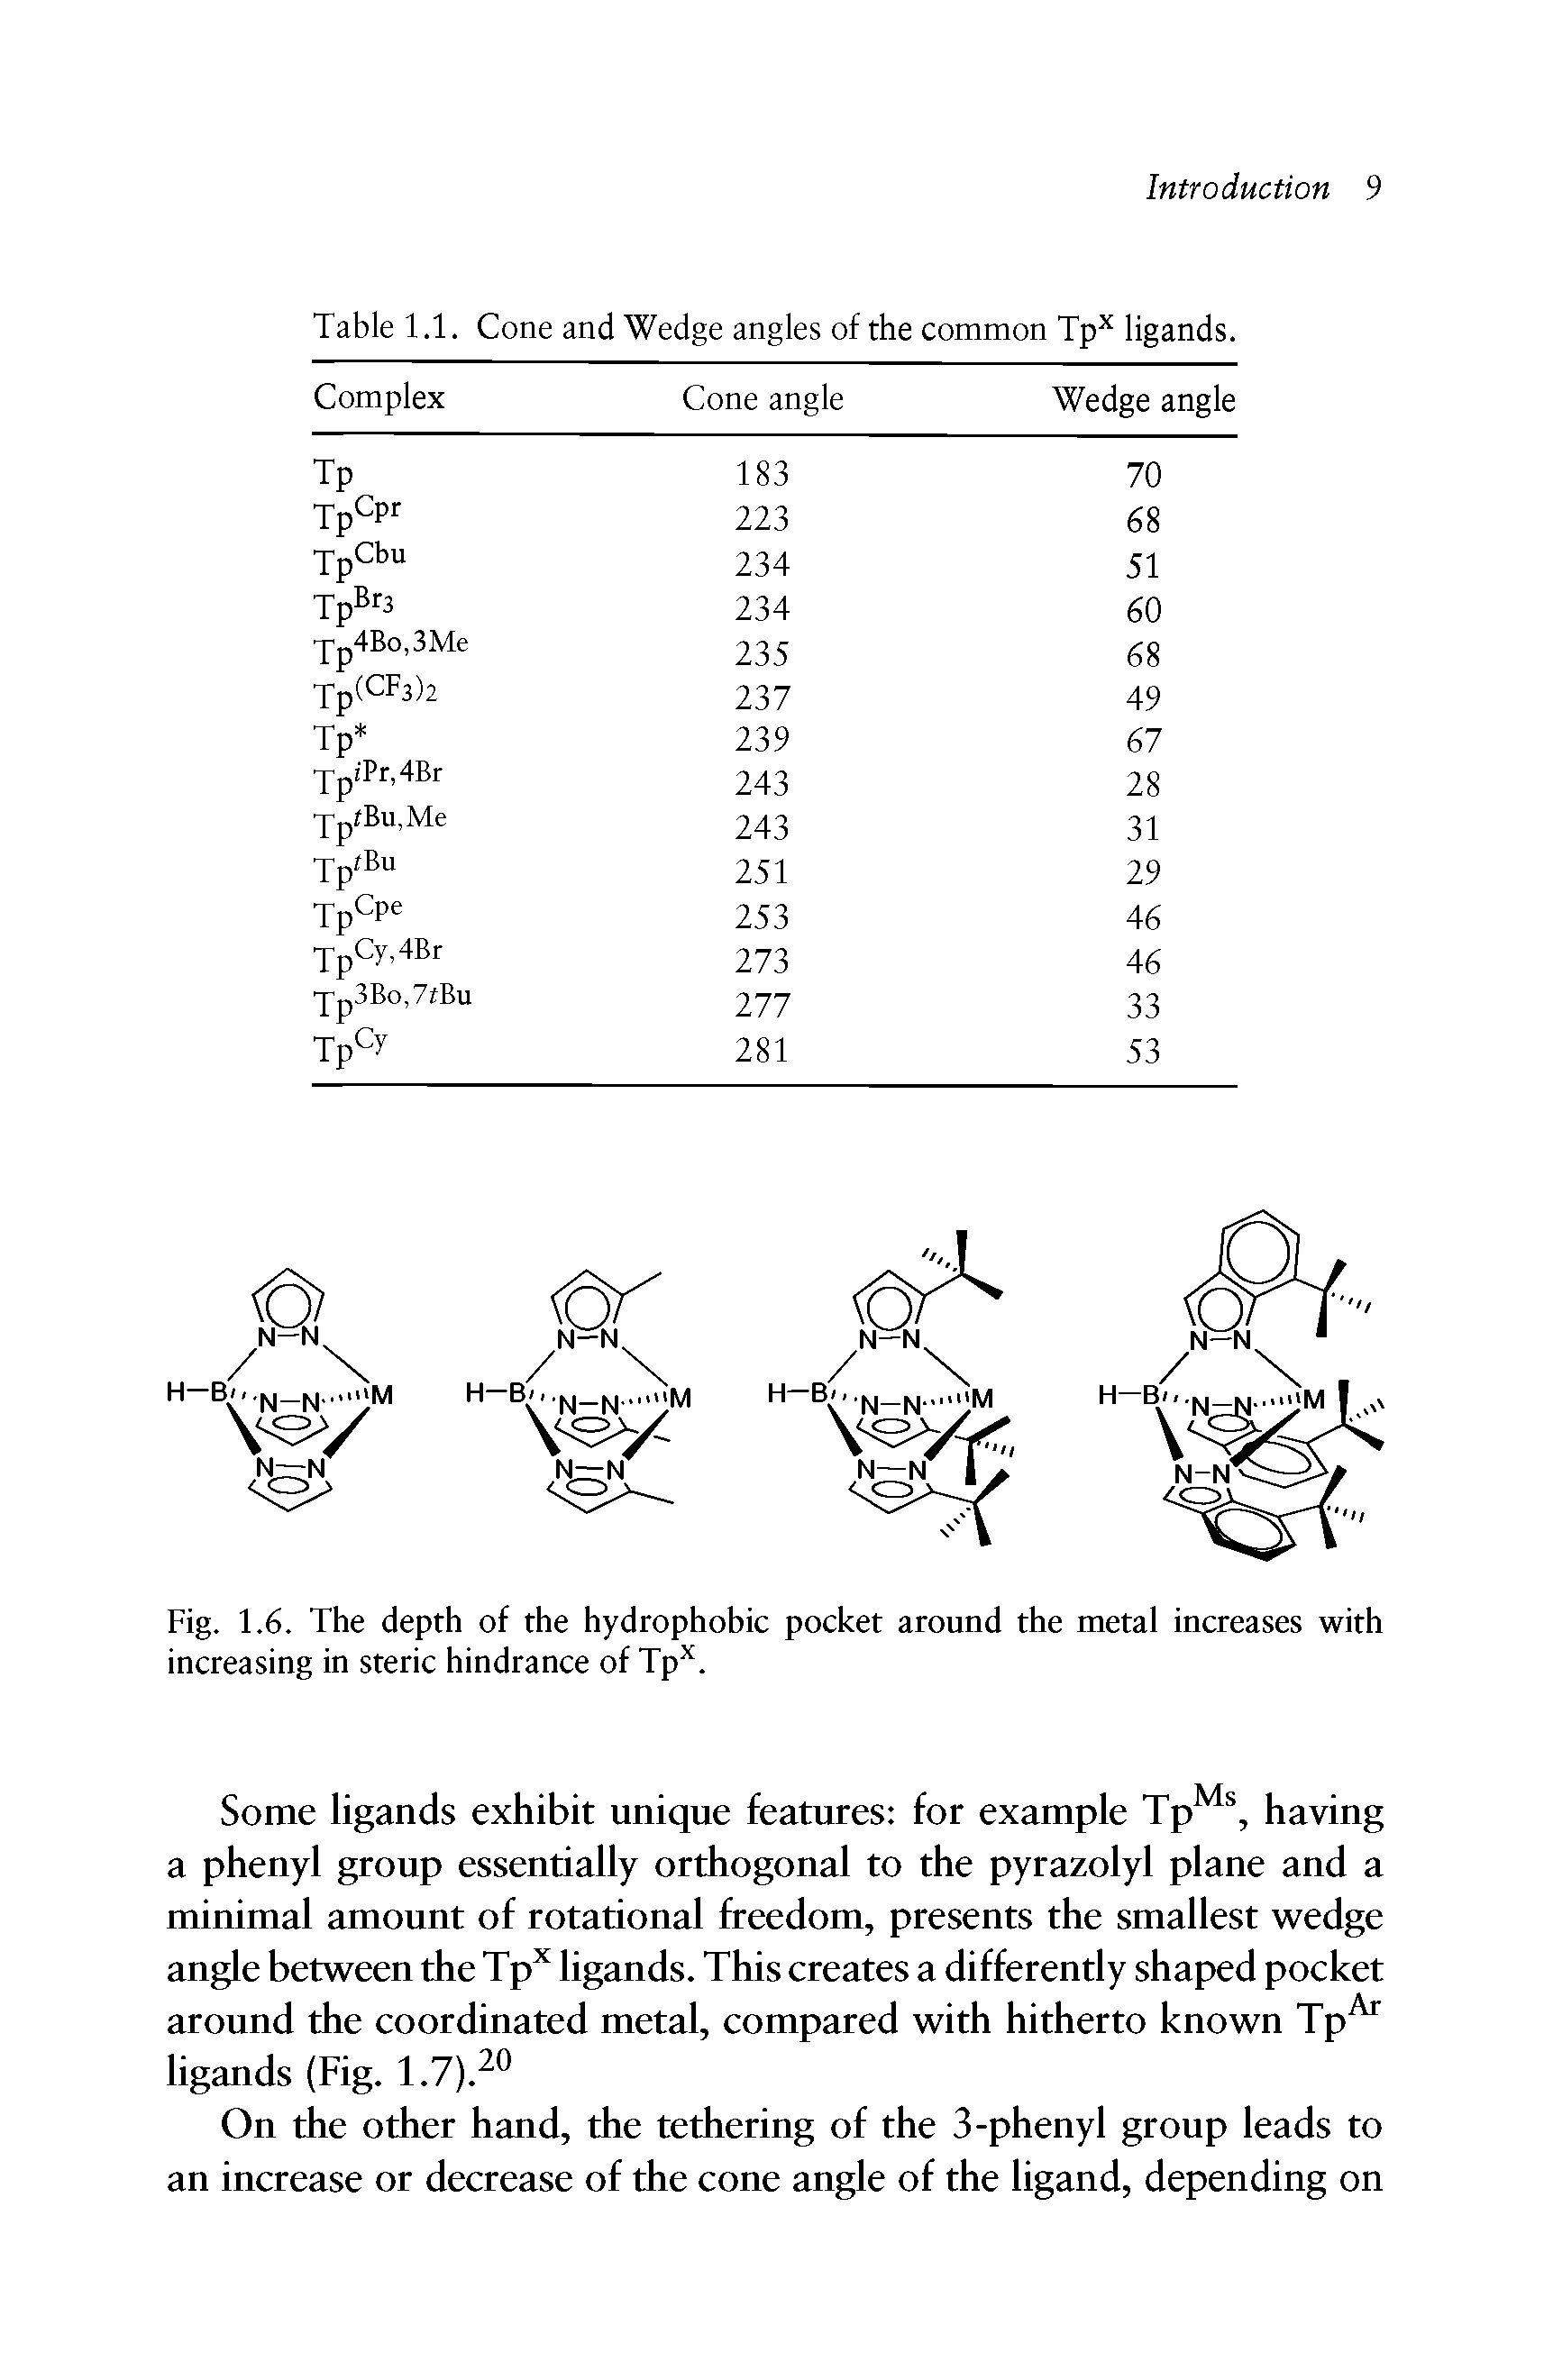 Table 1.1. Cone and Wedge angles of the common Tpx ligands.